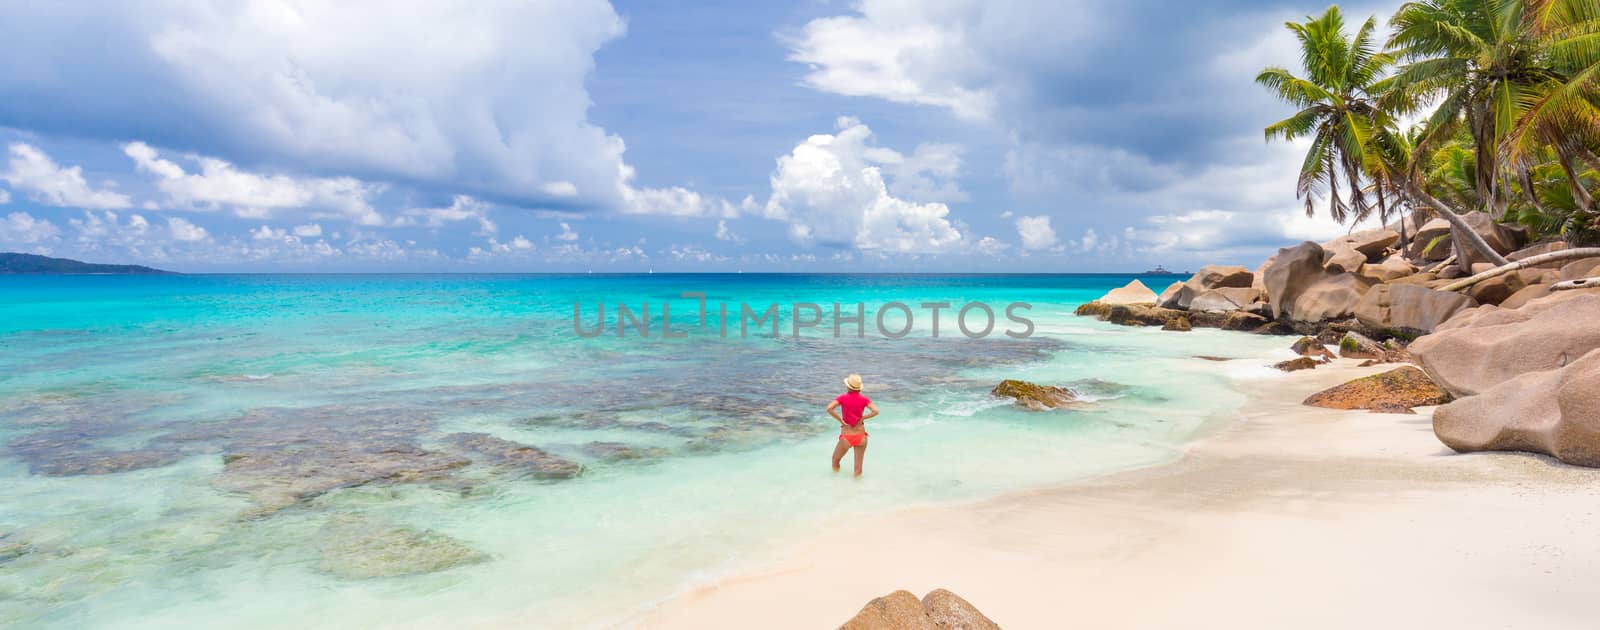 Woman wearing retro striped bikini and beach hat, enjoying amazing view on Anse Patates beach on La Digue Island, Seychelles. Summer vacations on picture perfect tropical beach concept.